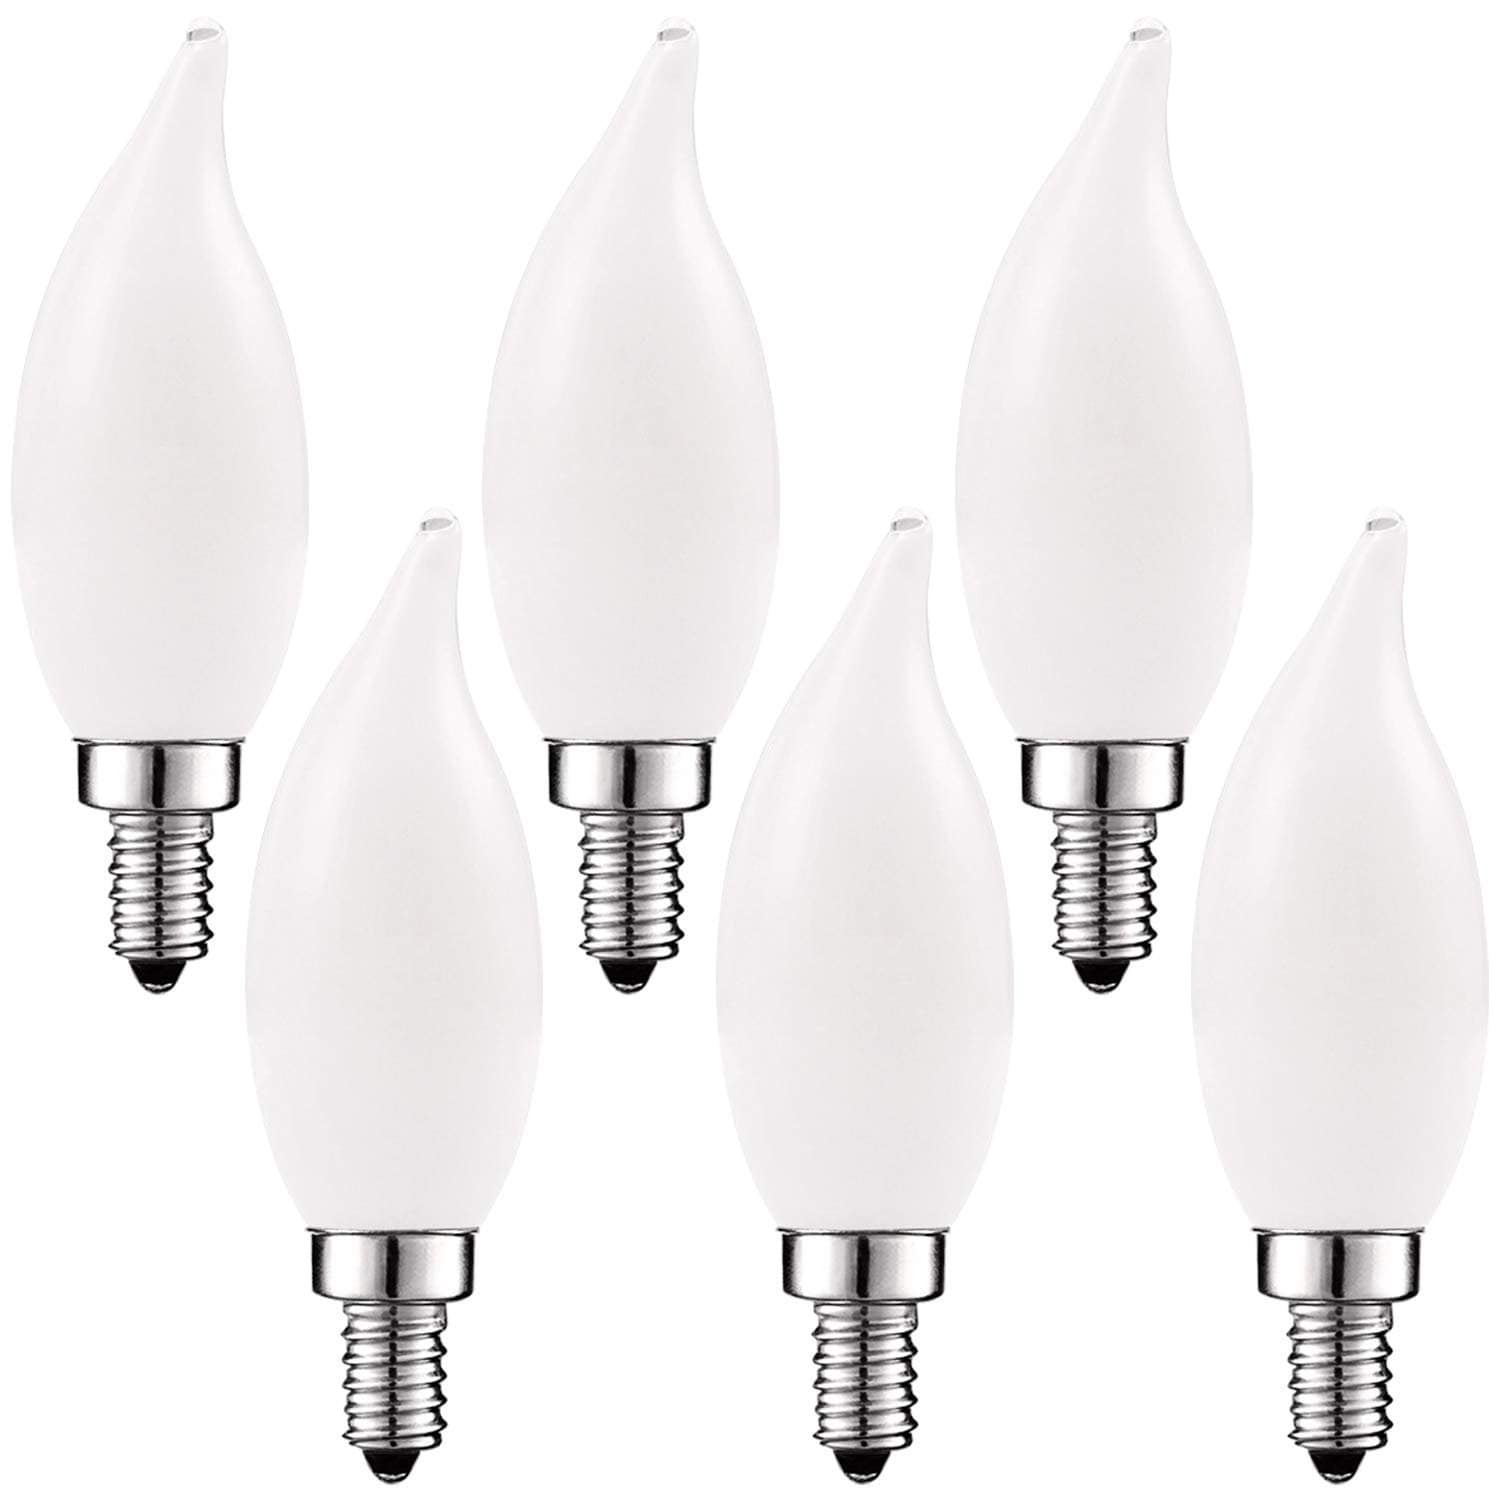 12 Pack Details about    LED 60W Chandelier Filament B11 Clear Bulb Candelabra E12 Warm White 